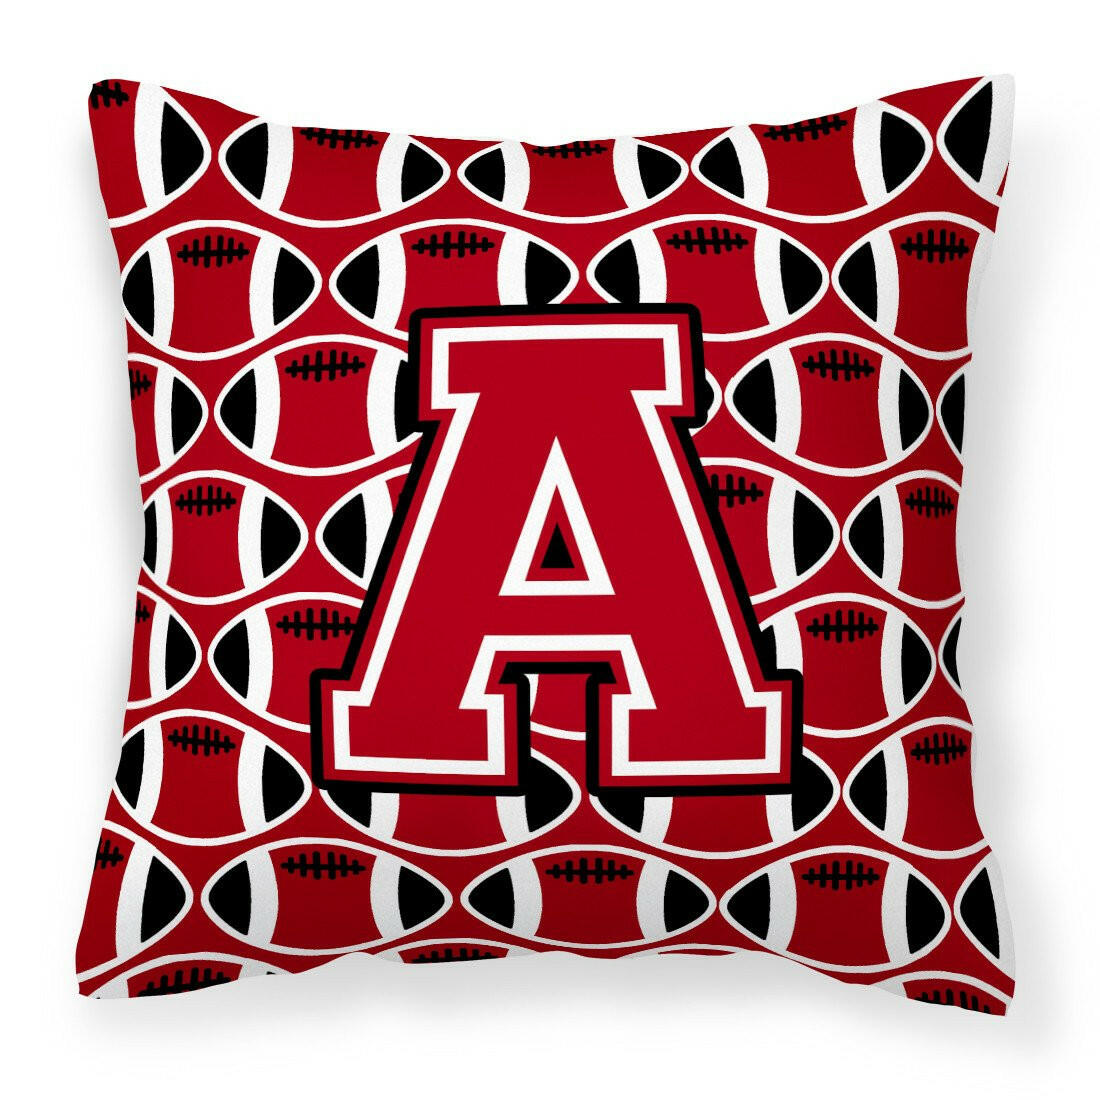 Letter A Football Red, Black and White Fabric Decorative Pillow CJ1073-APW1414 by Caroline's Treasures